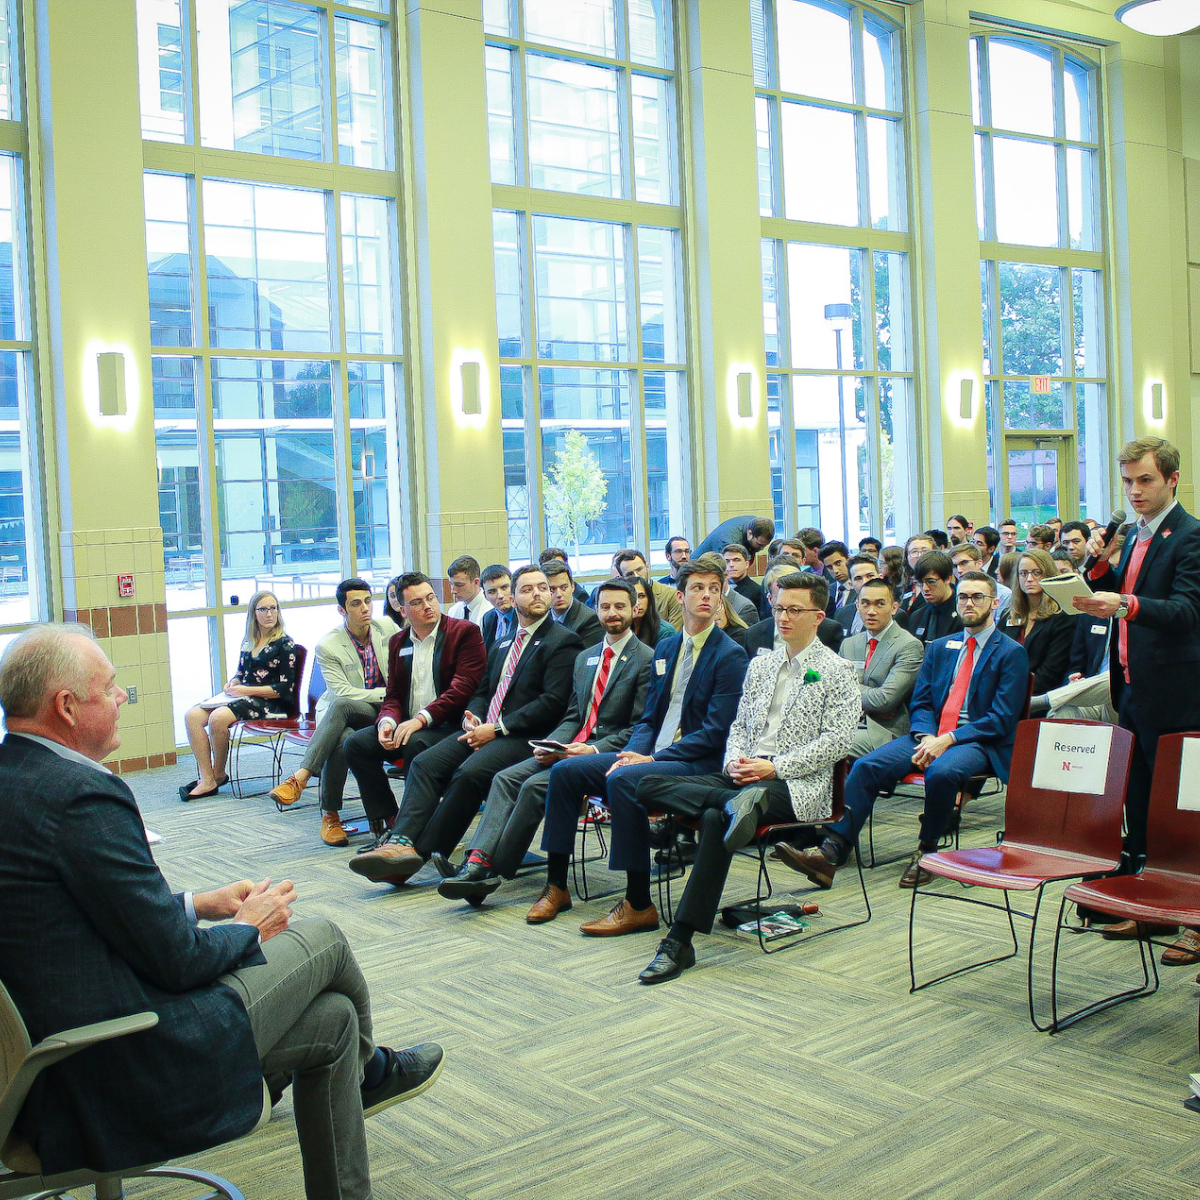 A large crowd of students wearing formal attire are sat in
				  an audience. In front of them, with their back to the camera,
				  is an individual sat in a chair. To the right, an individual
				  is stood behind a red chair with a white label on it, asking a
				question.